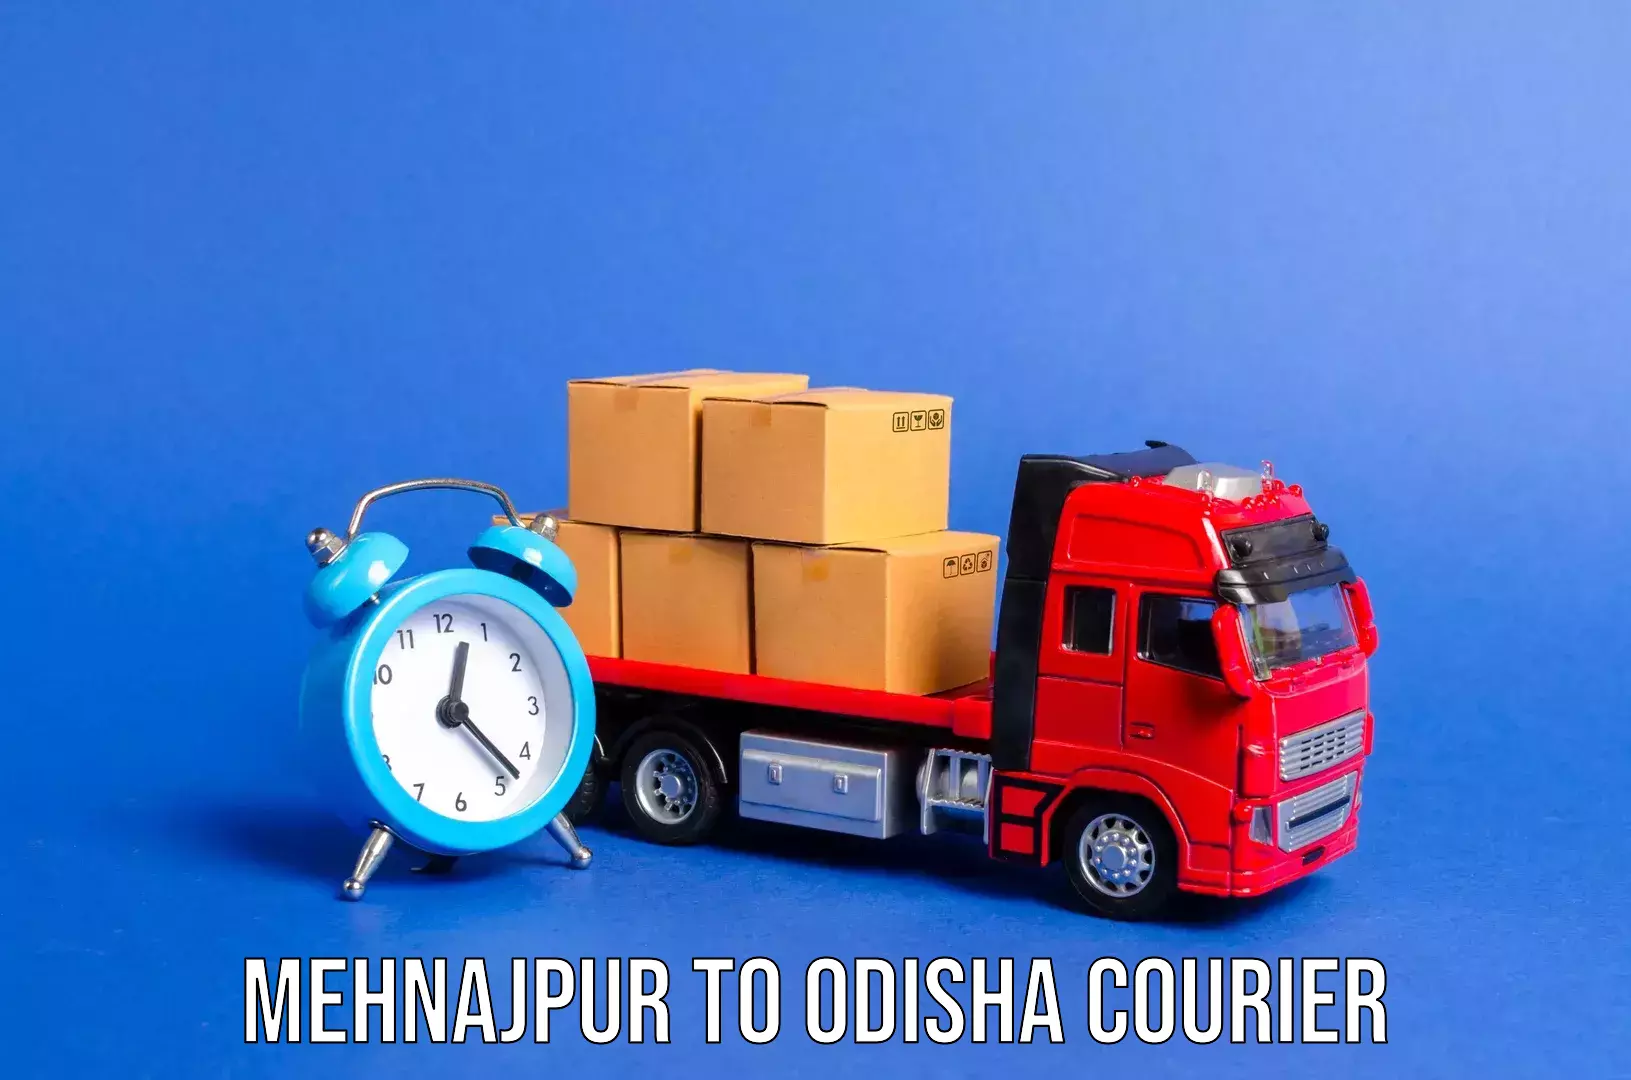 Luggage shipment tracking Mehnajpur to Behrampur